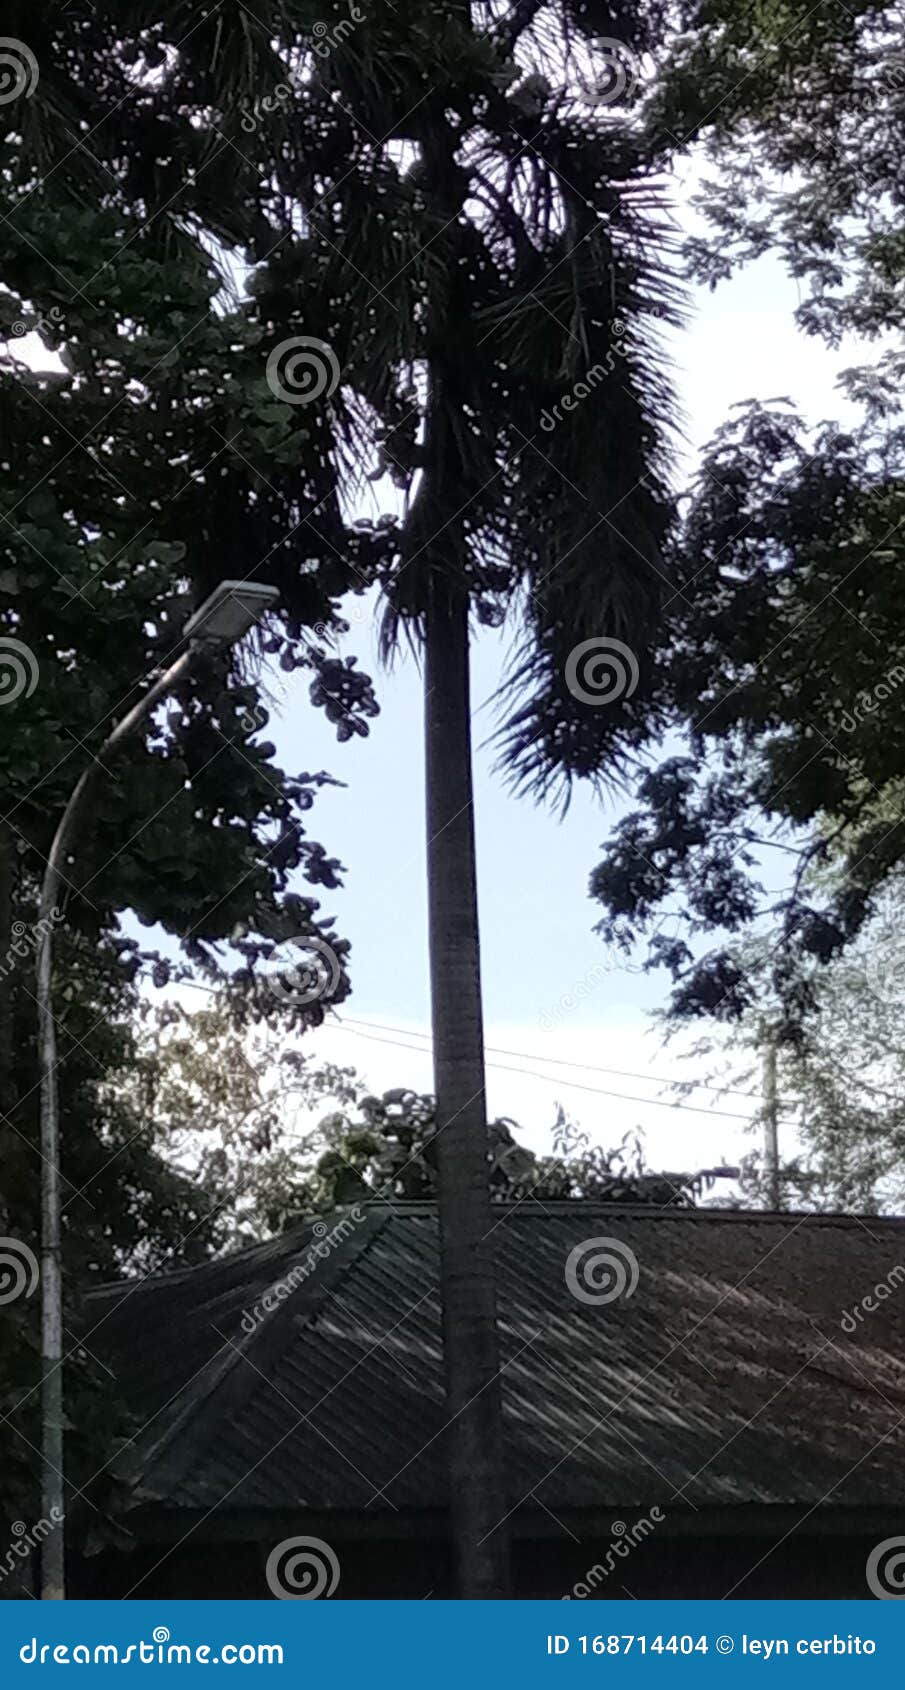 the palmera tree standing tall in the city to provide shade